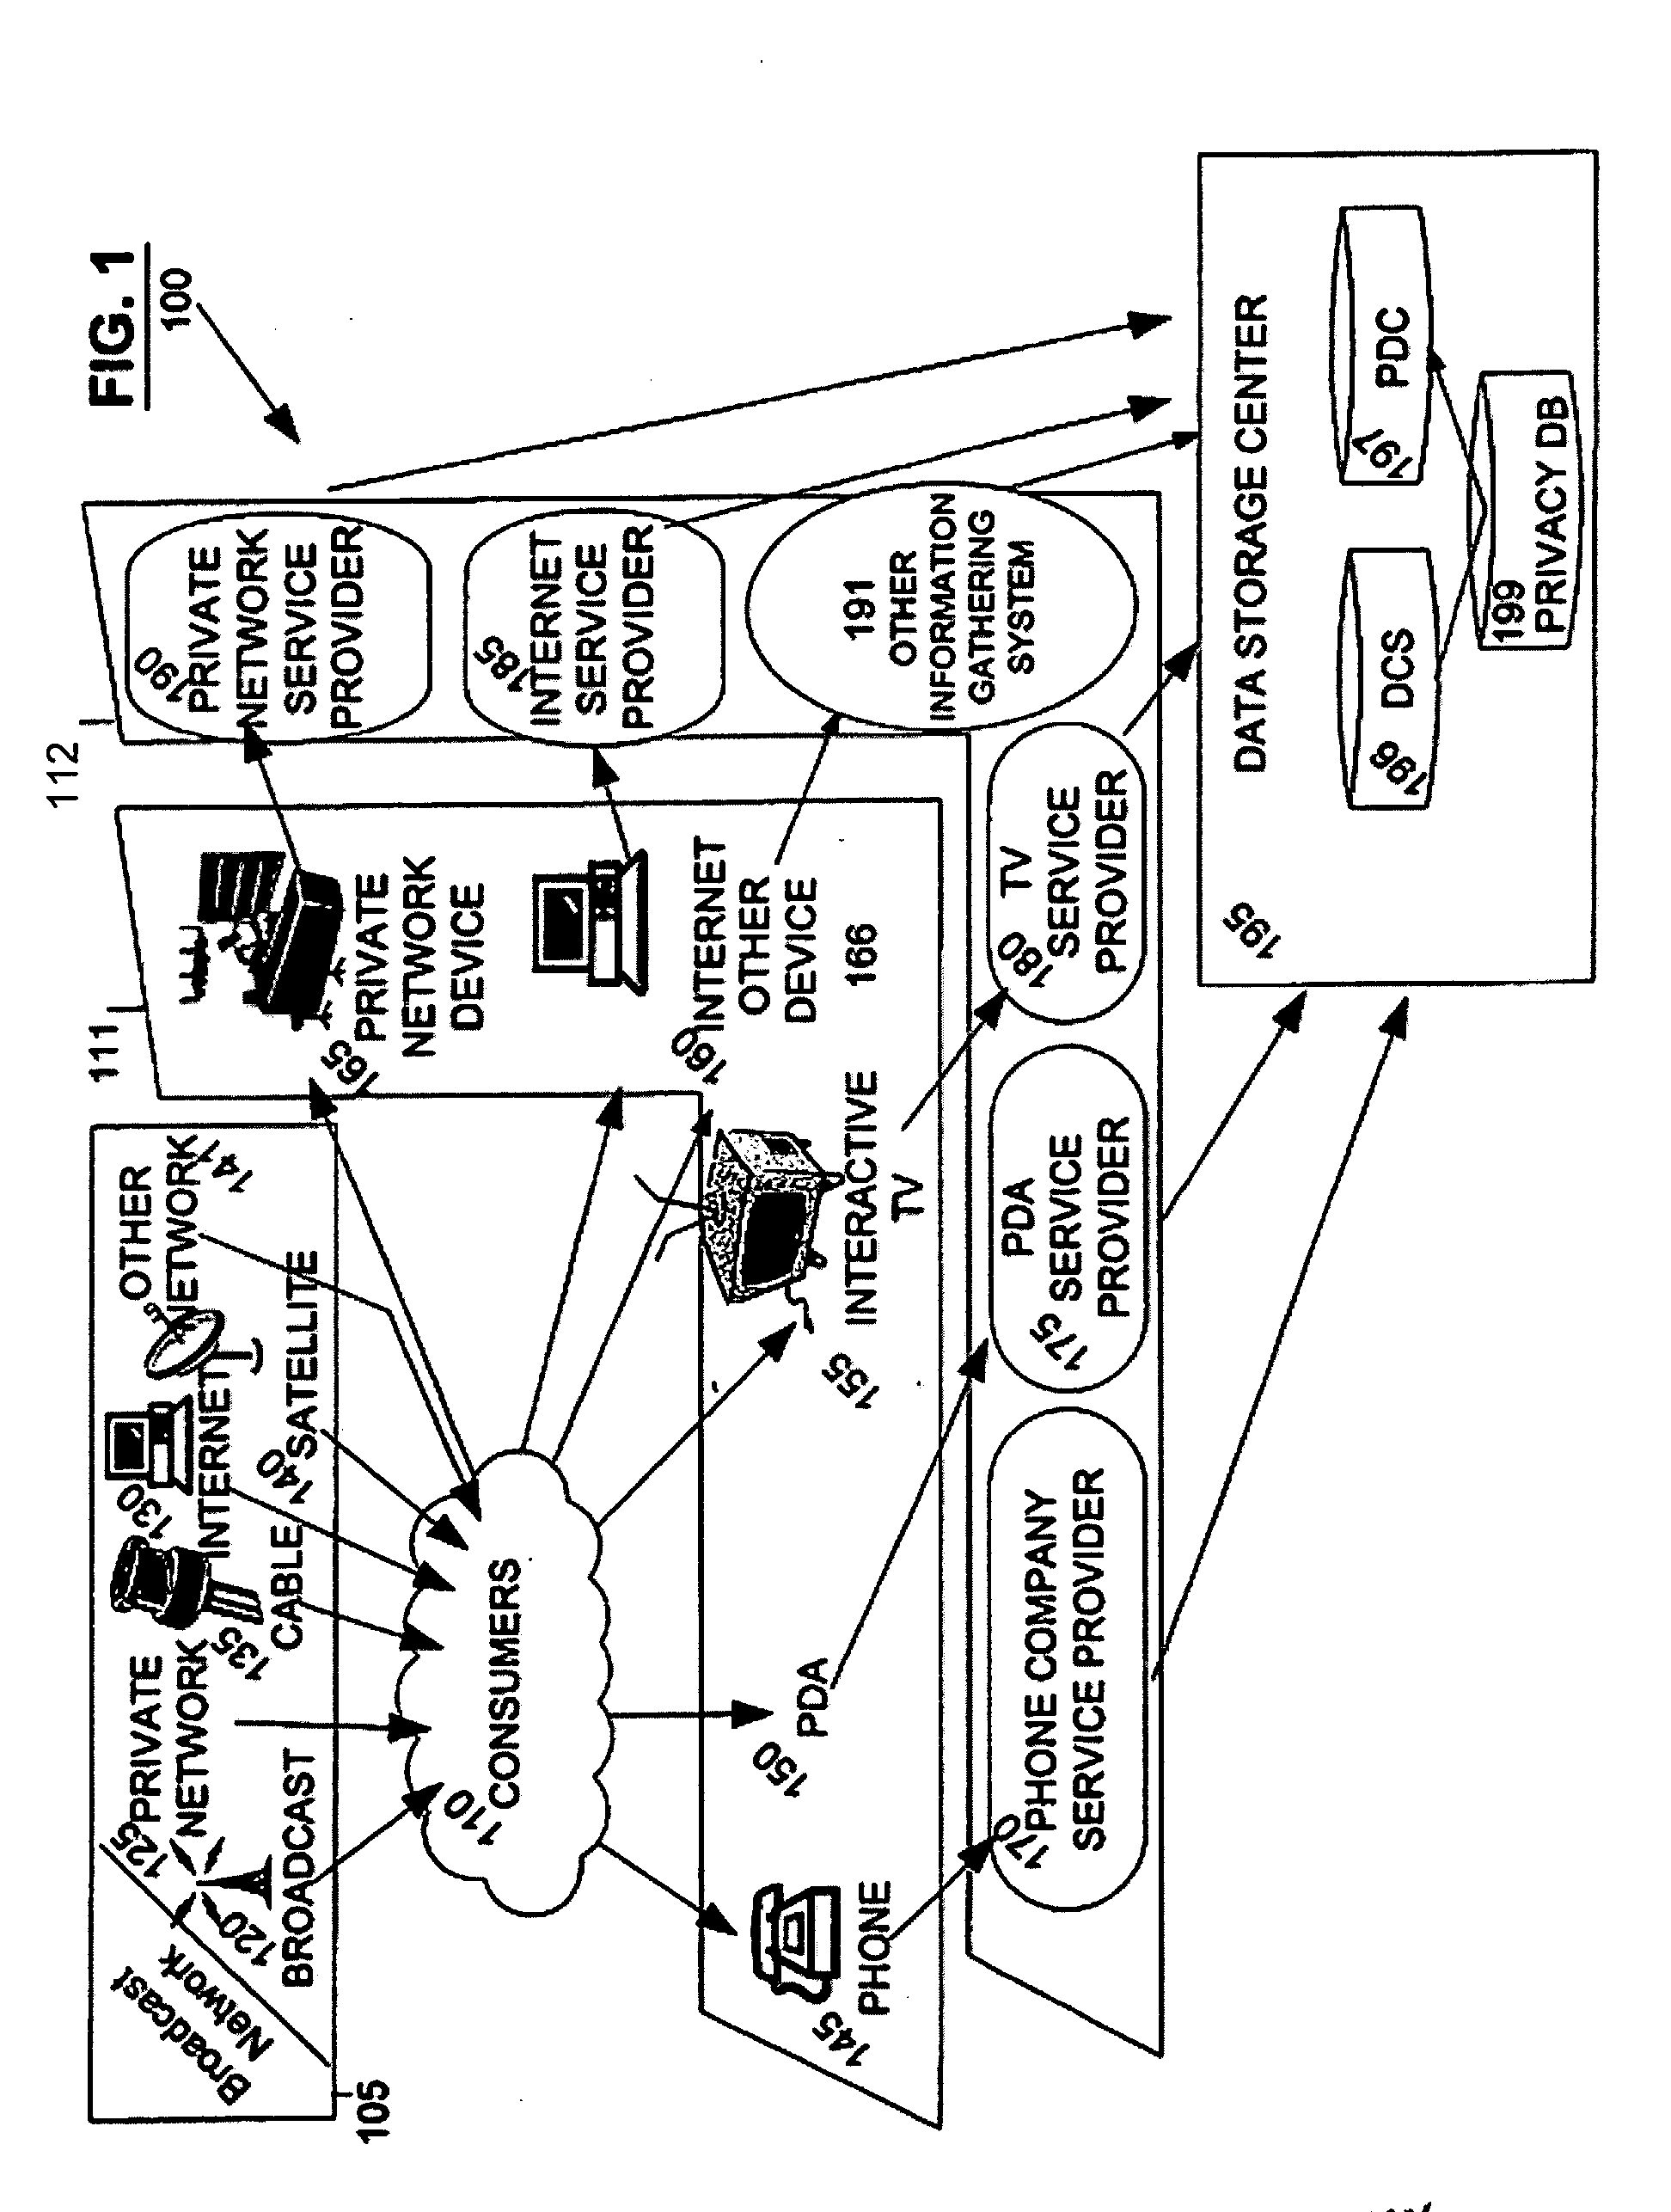 Method and system for interacting with on-demand video content